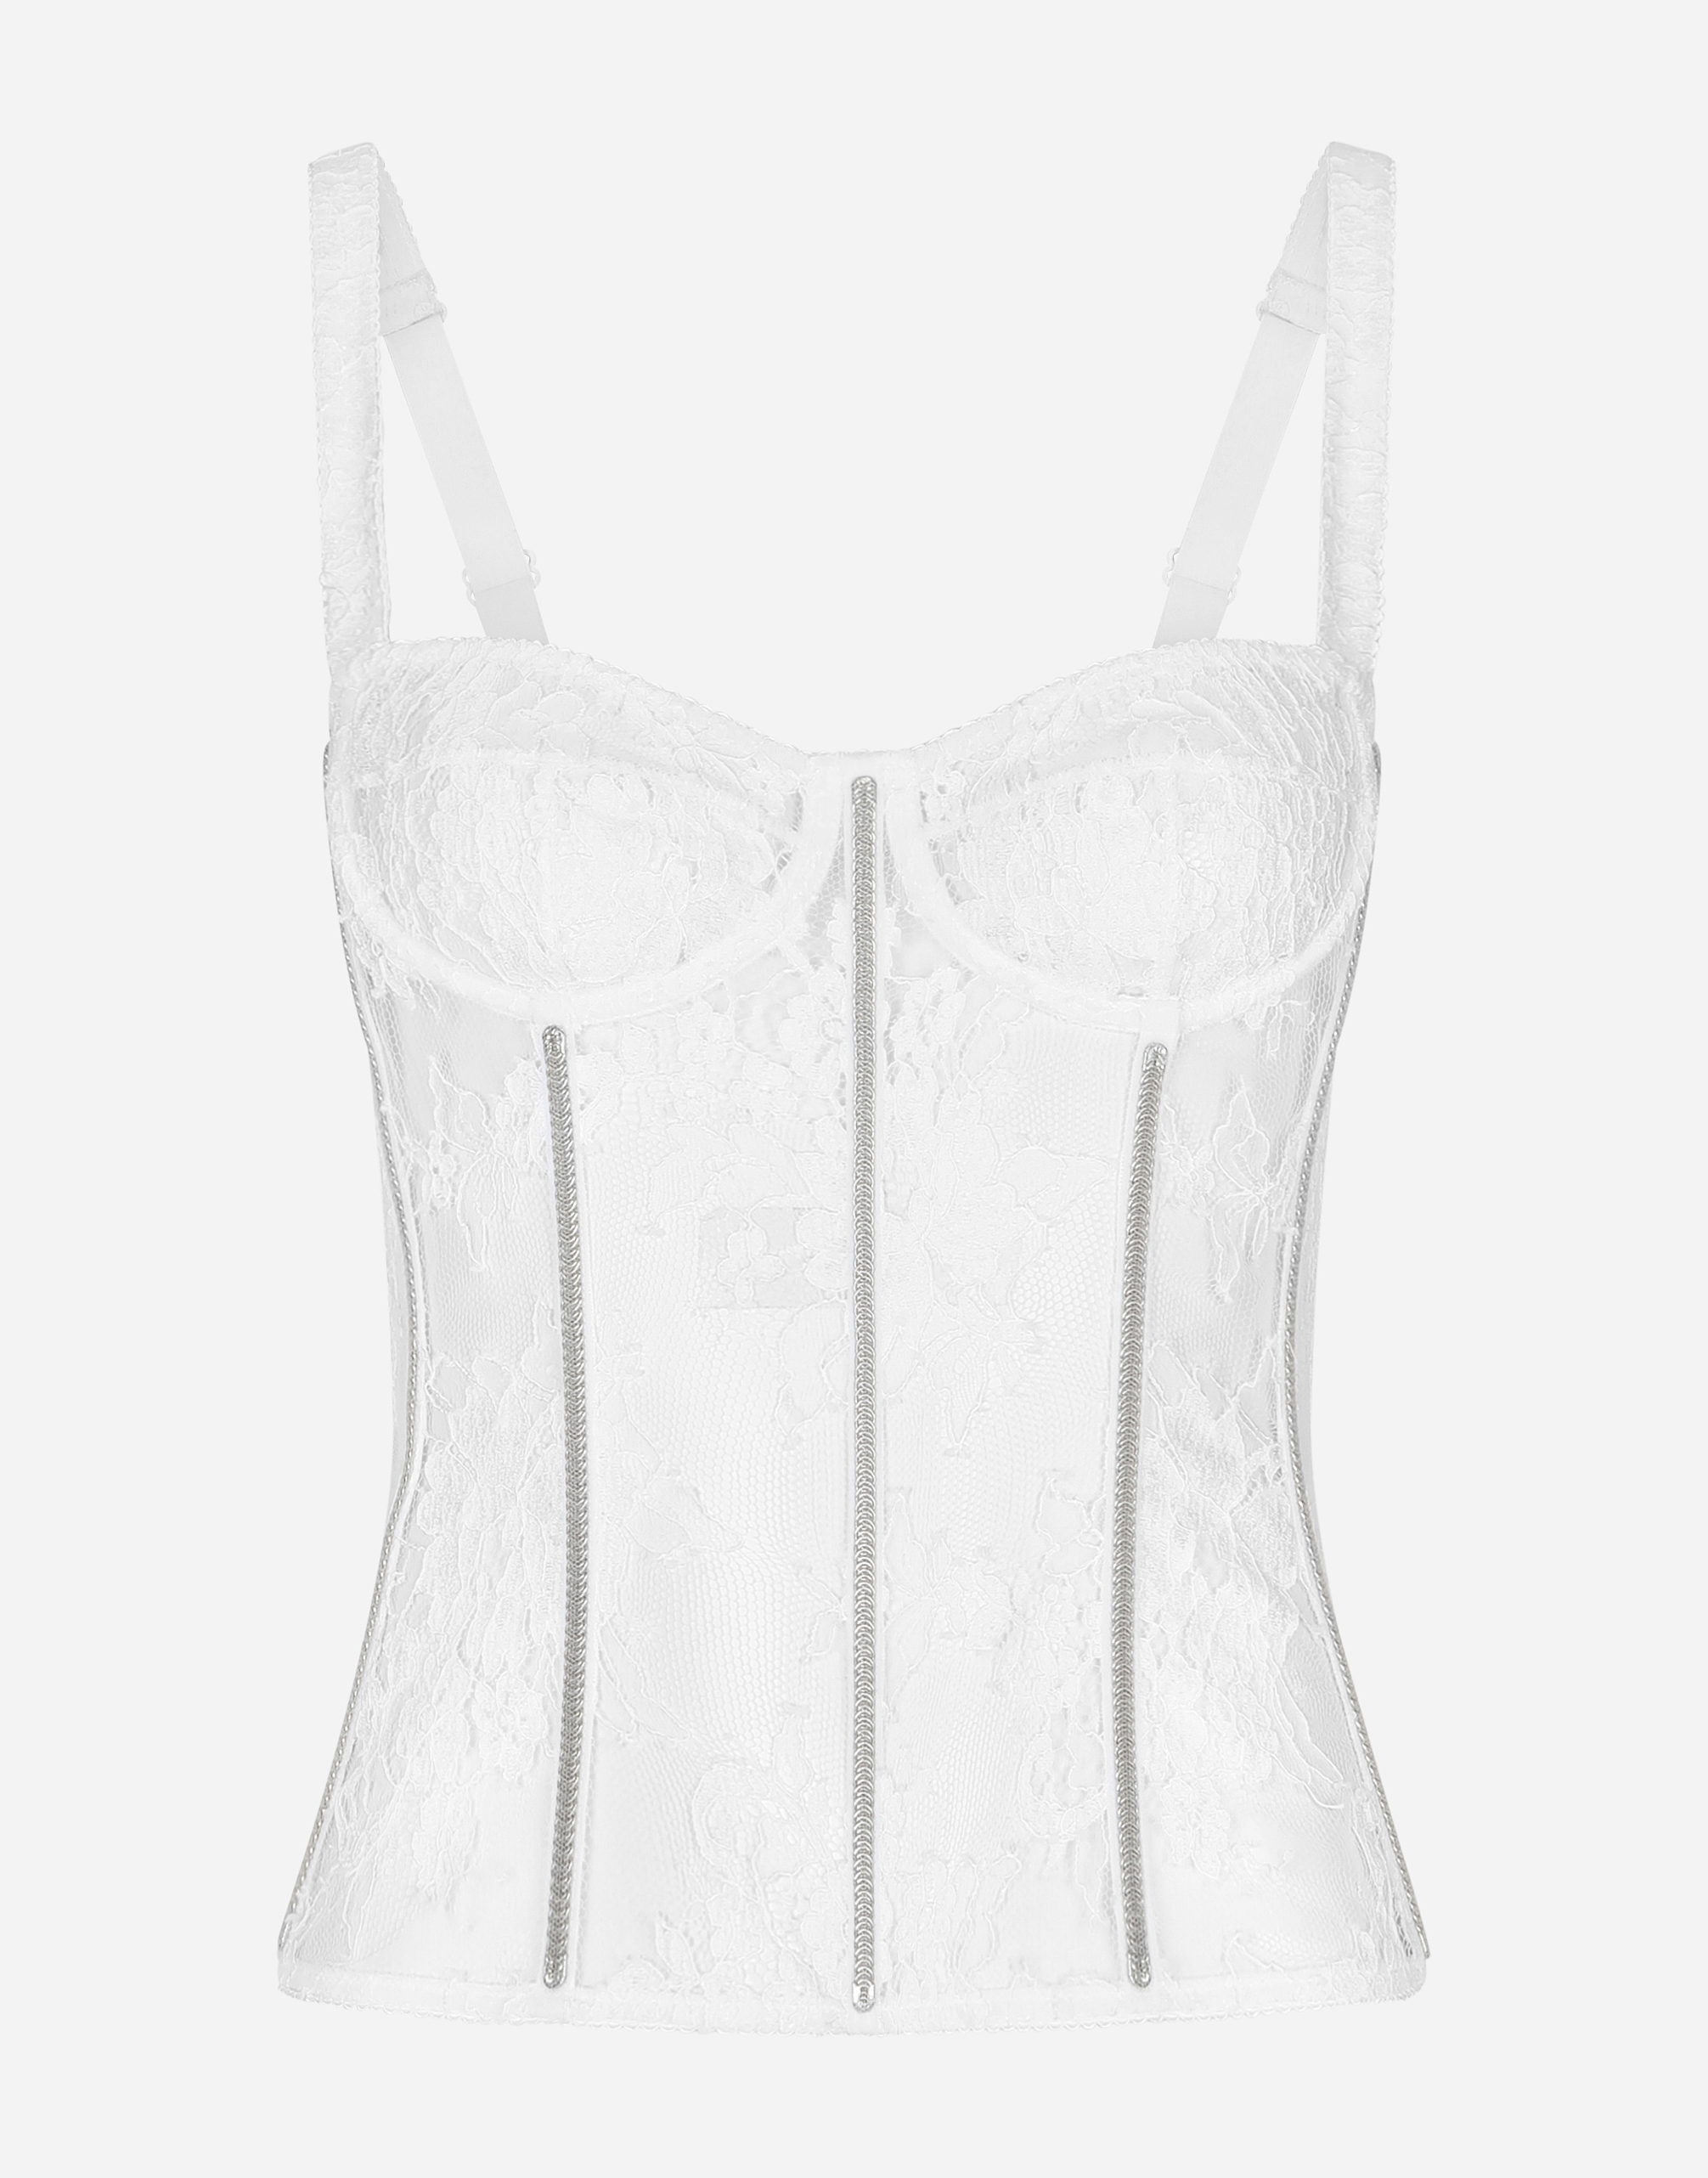 Lace lingerie bustier with straps in White